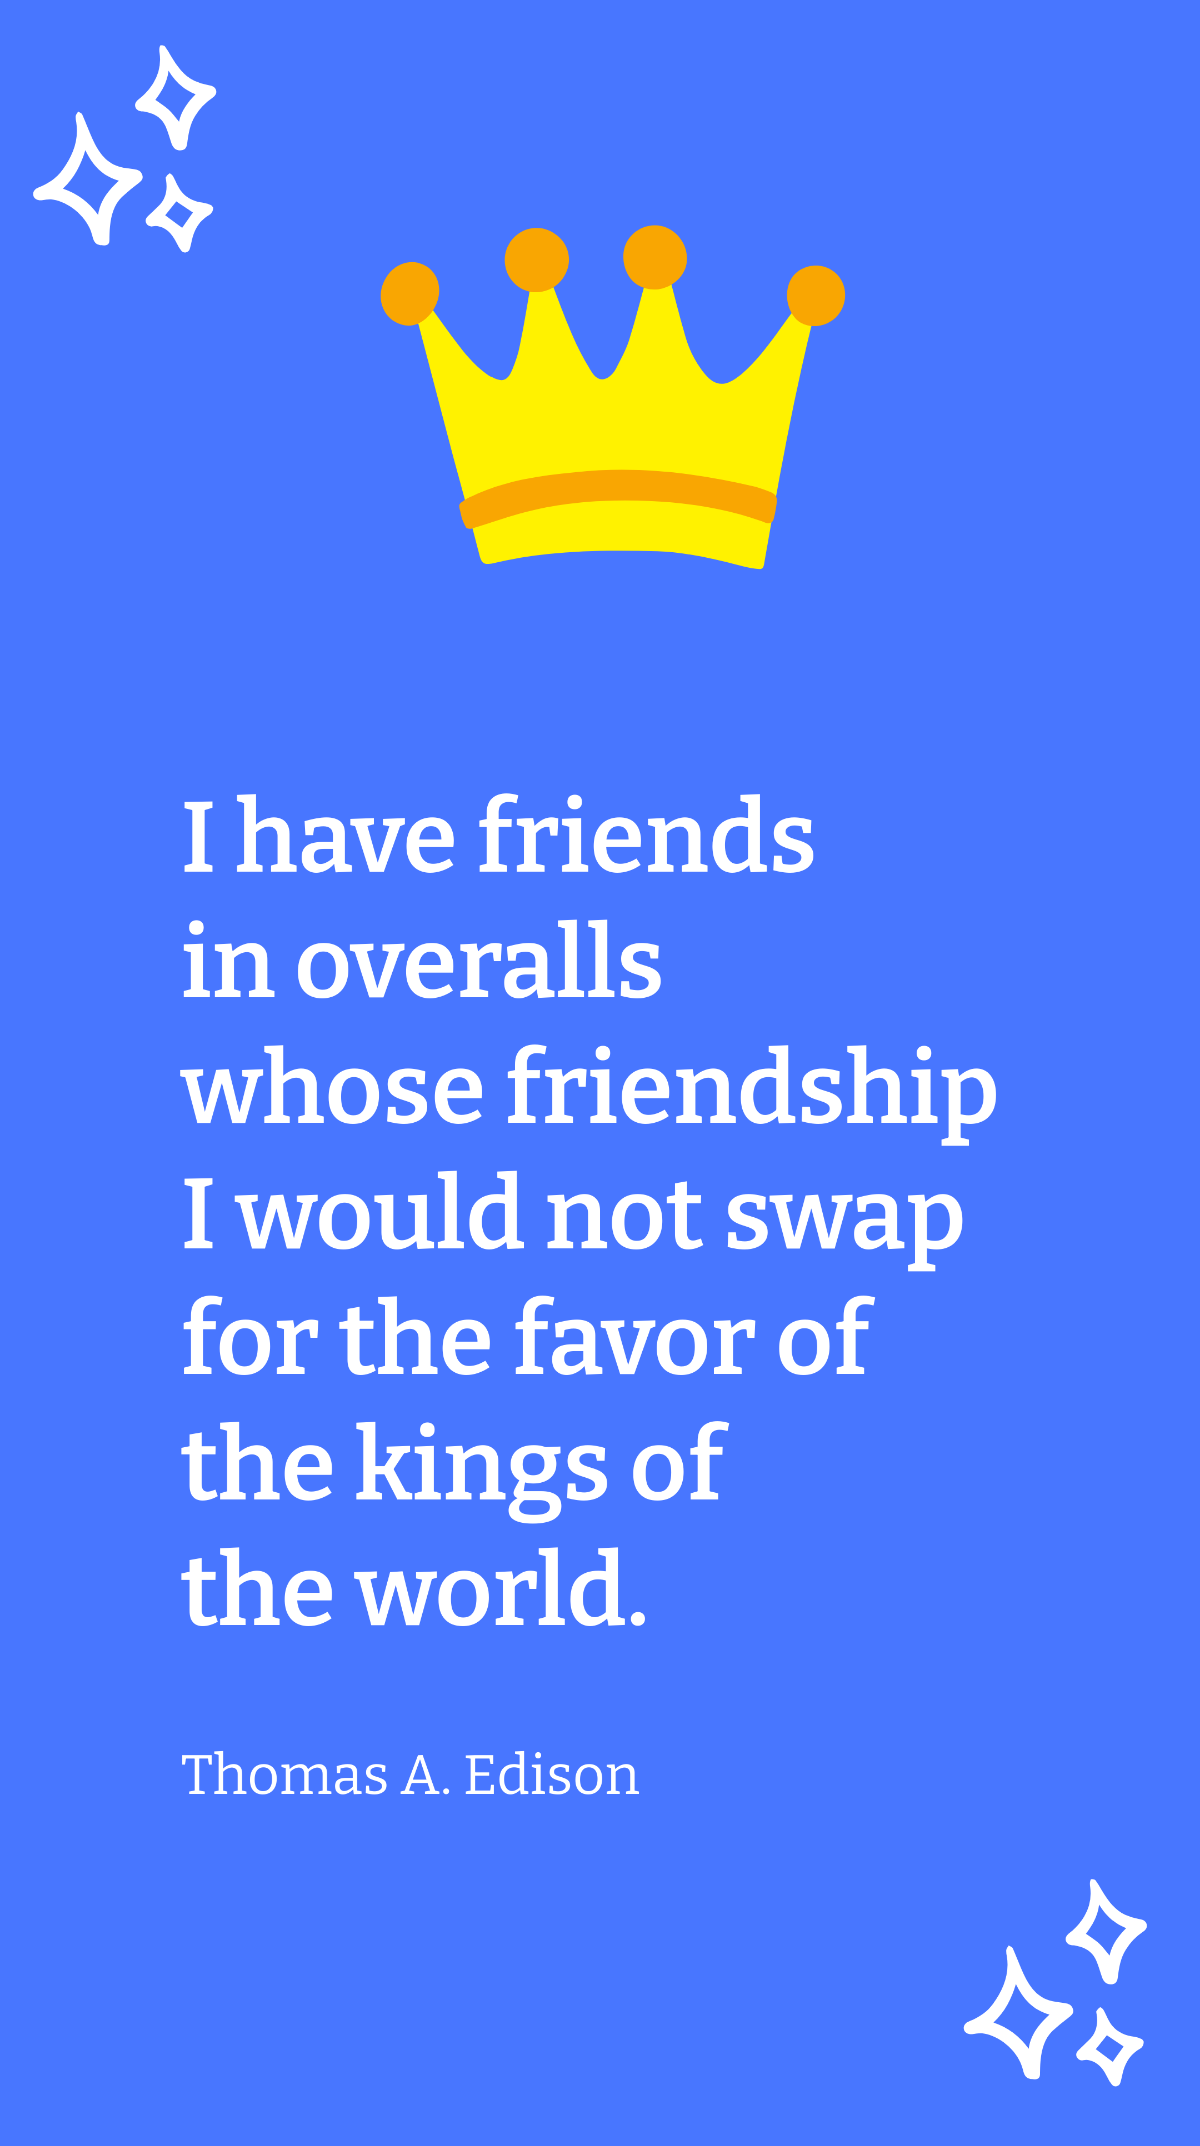 Thomas A. Edison - I have friends in overalls whose friendship I would not swap for the favor of the kings of the world. Template